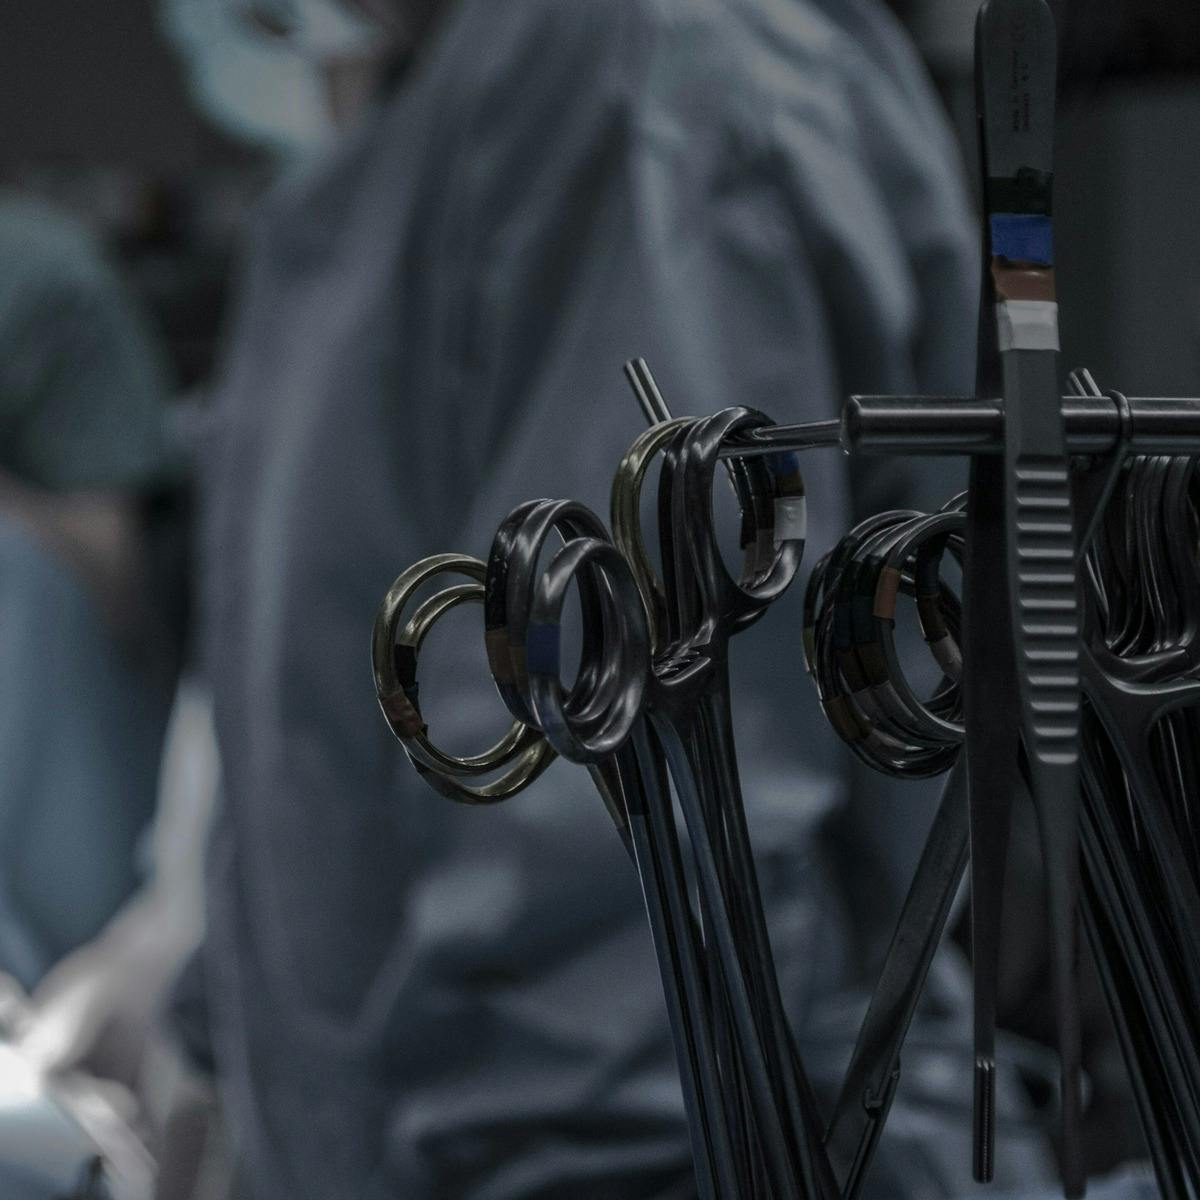 Closeup photo of surgical tools in an operating theater.